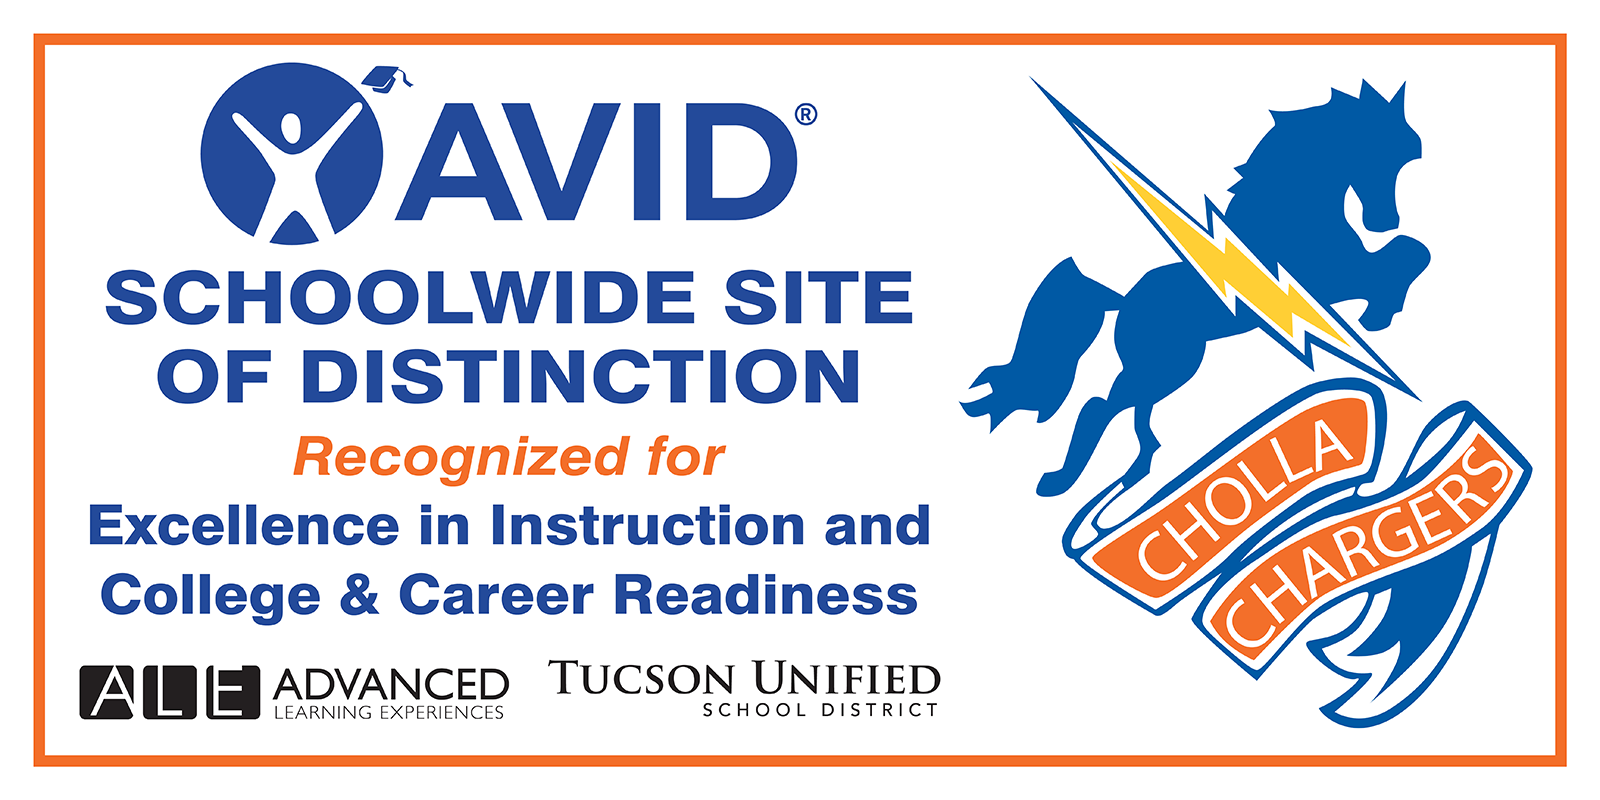 Cholla Schoolwide Site of Distinction, Excellence in Instruction and College & Career Readiness